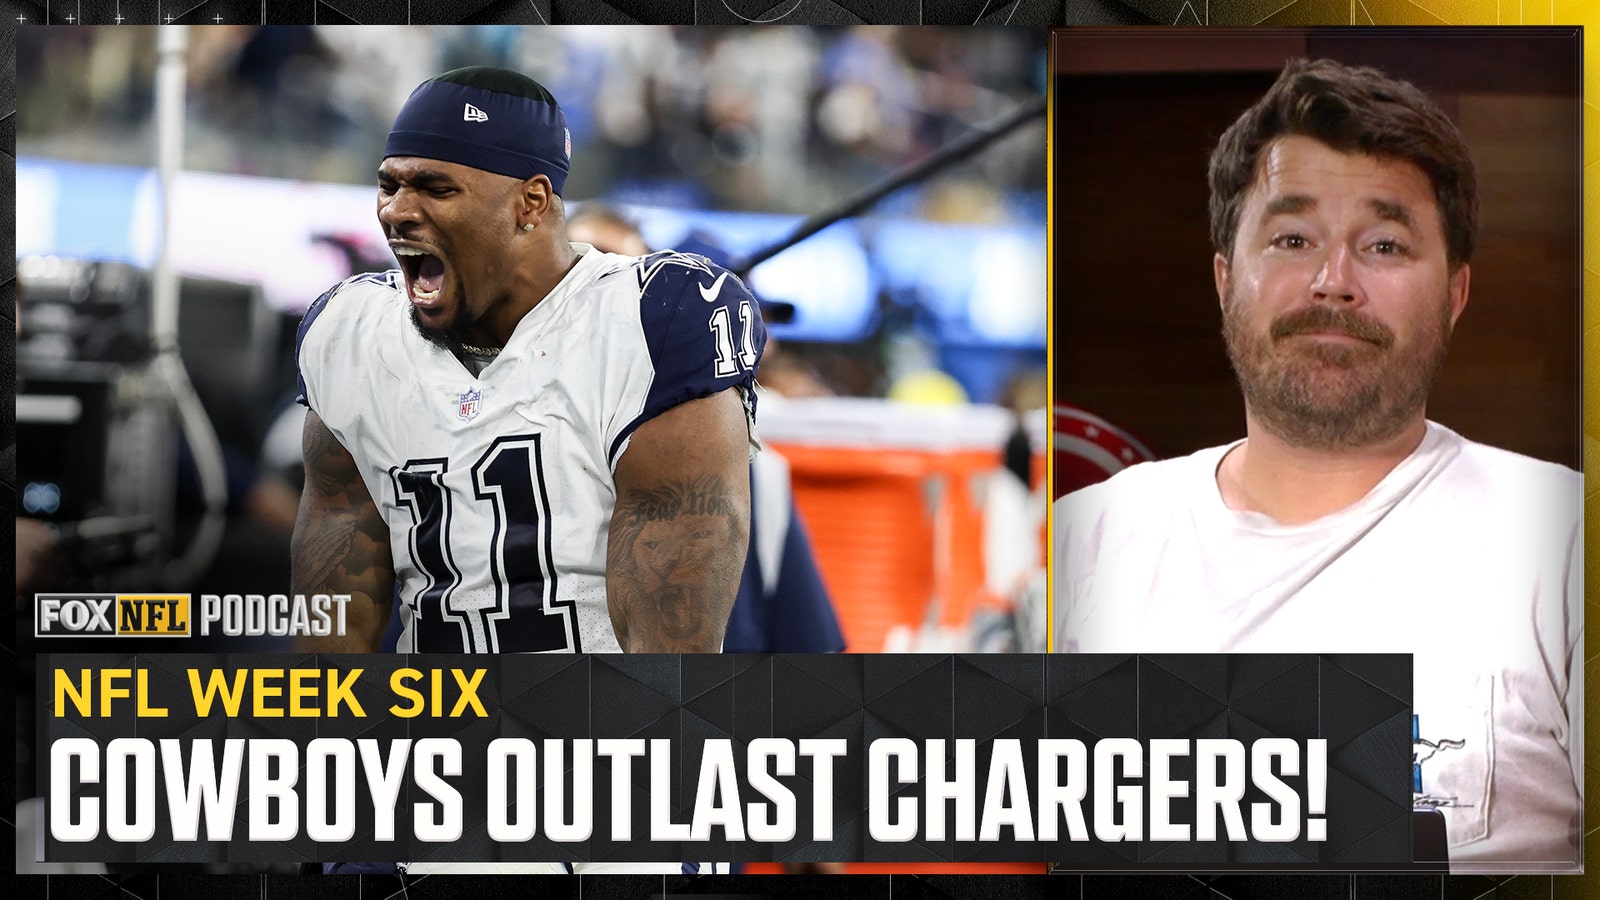 Dave Helman reacts to Cowboys' win over Chargers 